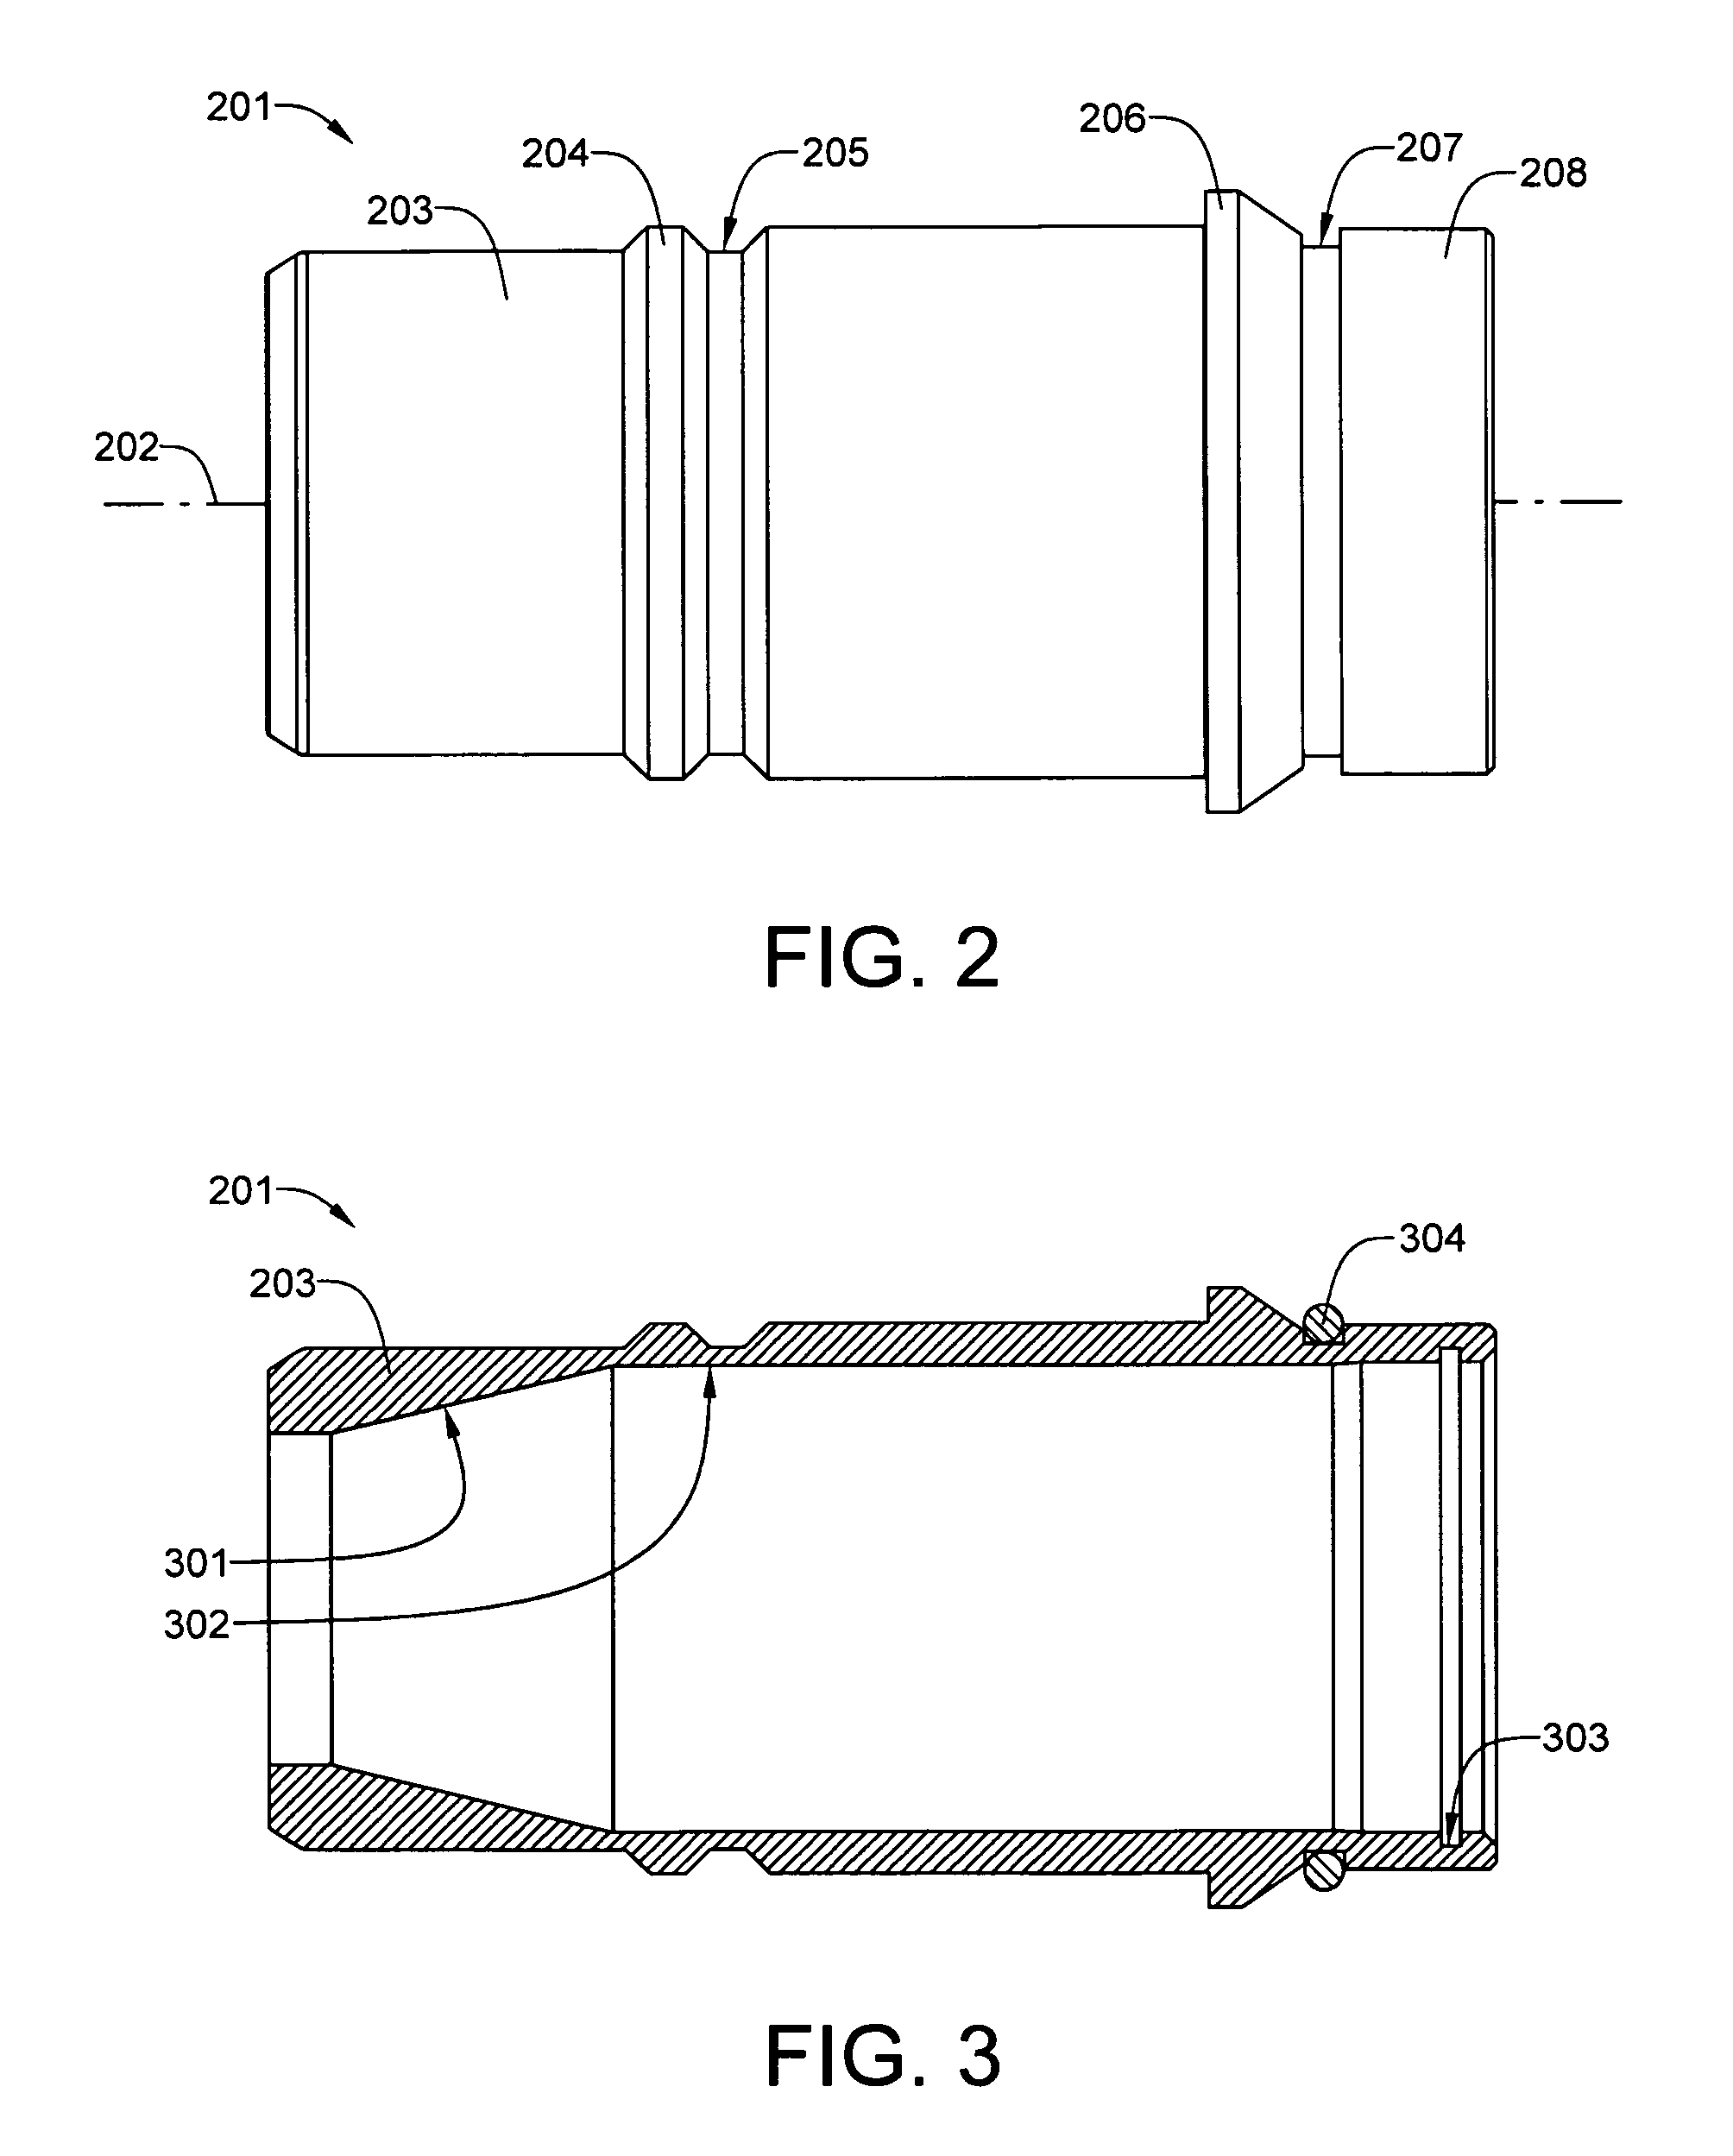 Refueling assembly having a check valve receptacle and a replaceable fuel receiver for bottom-filled fuel tanks